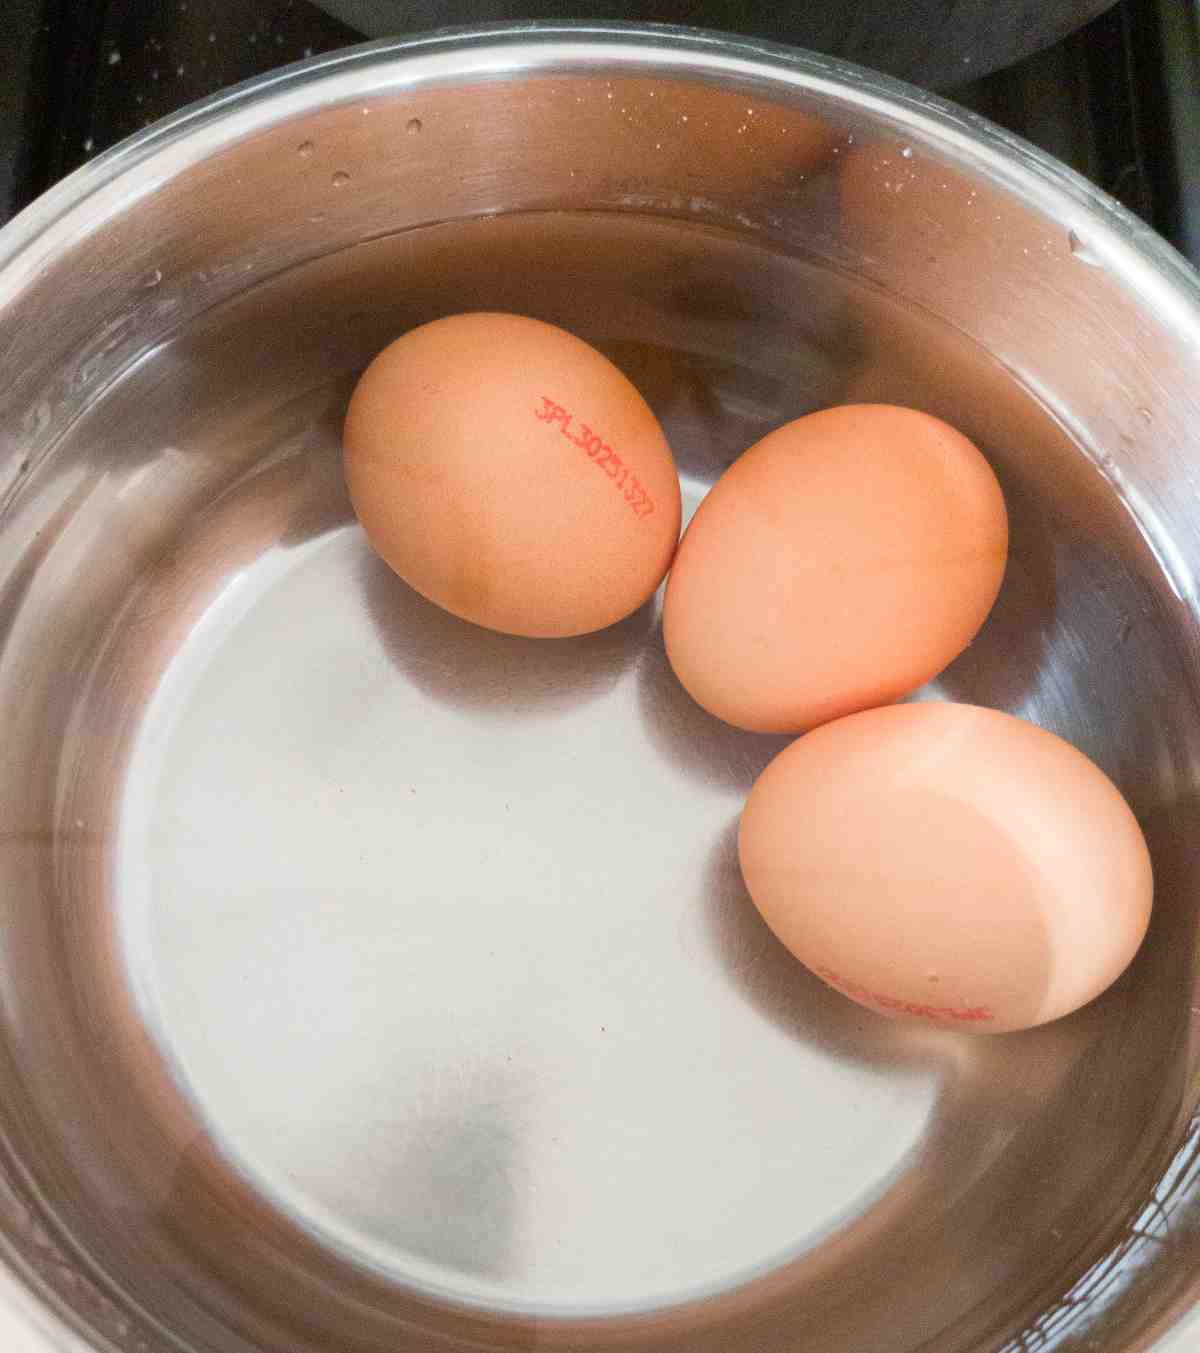 Three eggs in a small saucepan filled with water.